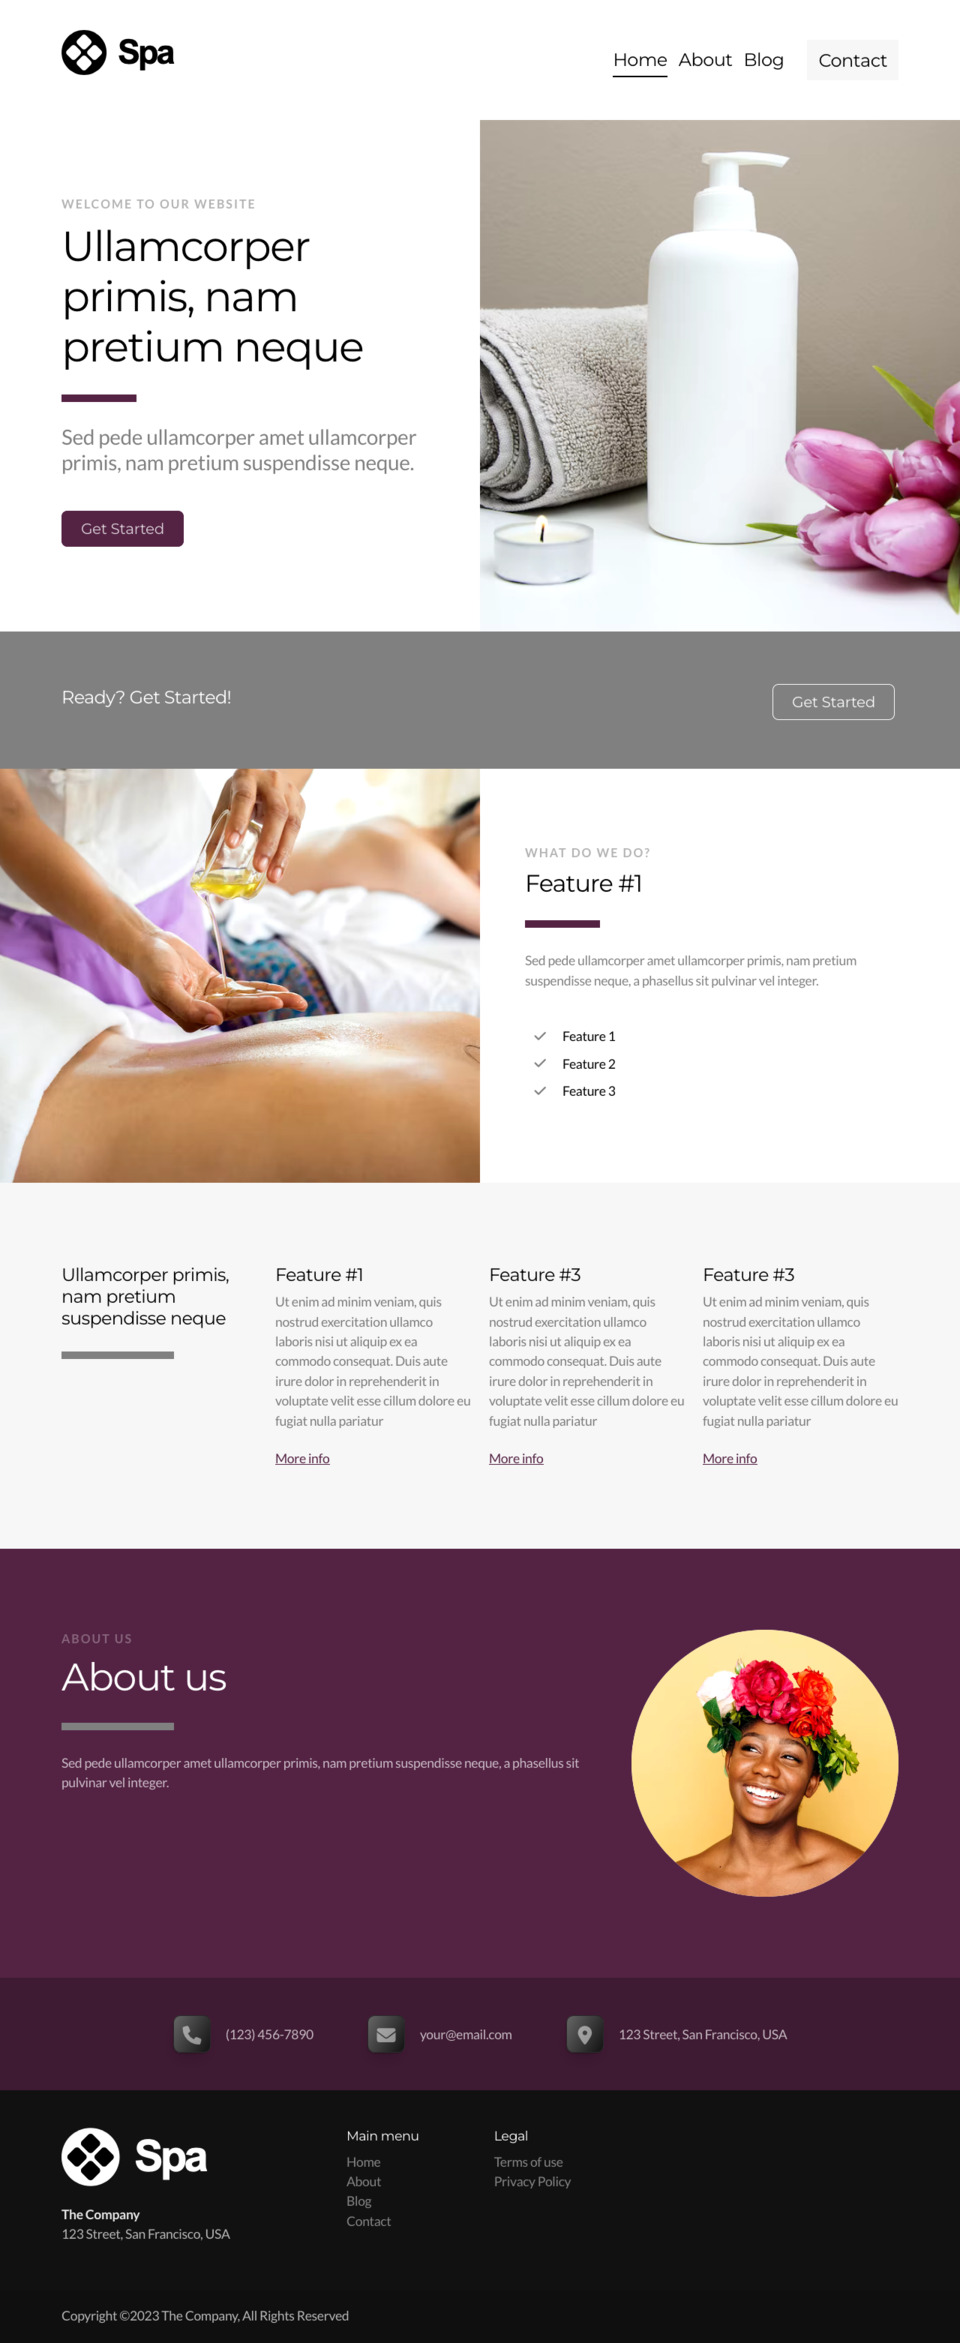 Spa Website Template - Perfect for spa businesses, beauty salons, wellness centers, massage therapists, and any business looking for a luxurious and professional online presence.